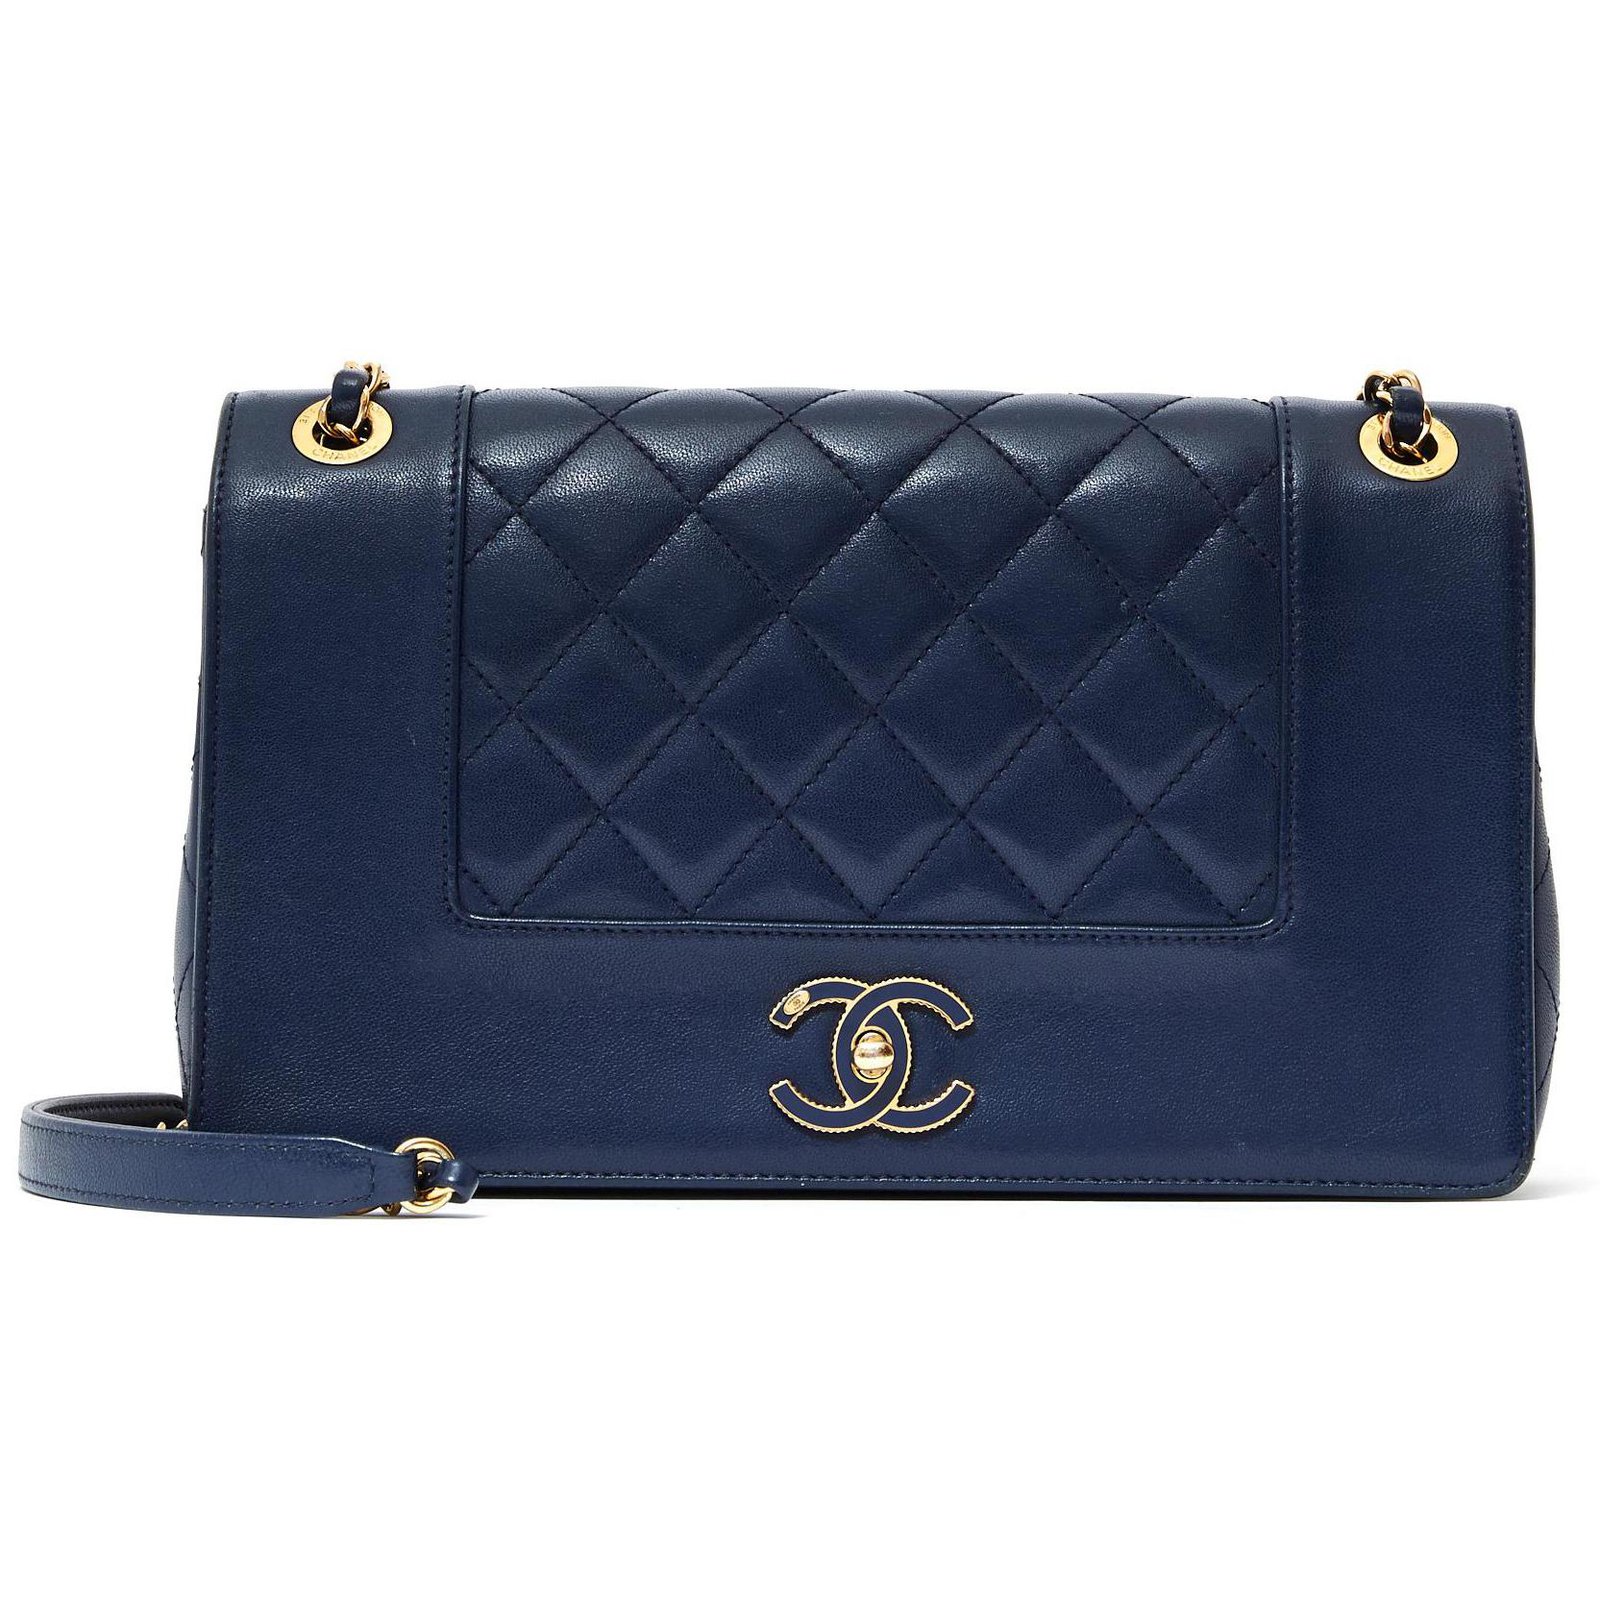 Chanel TIMELESS DIANA LIMITED EDITION NAVY Navy blue Leather ref